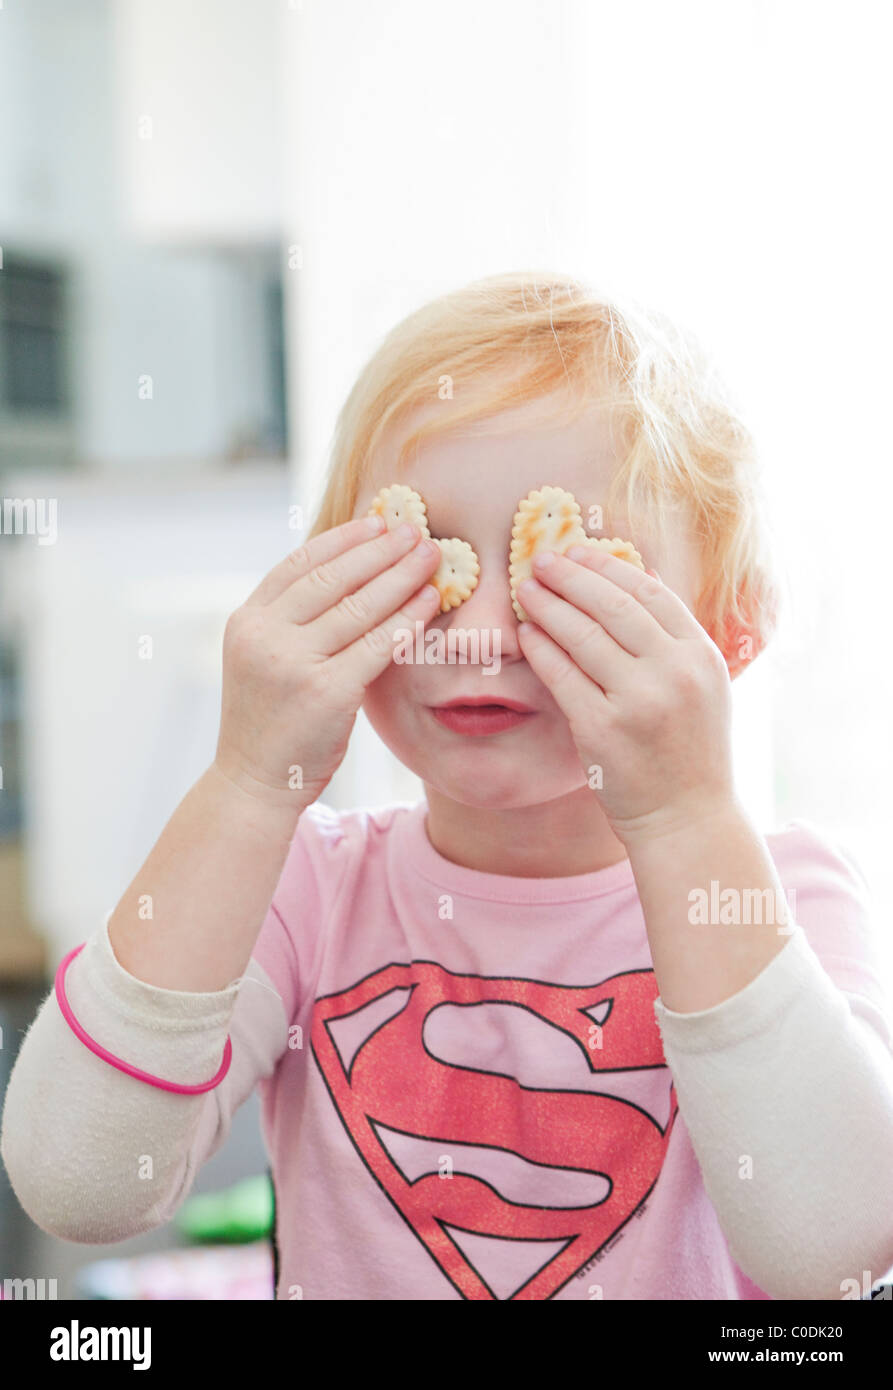 Little girl with crackers on her eyes Stock Photo